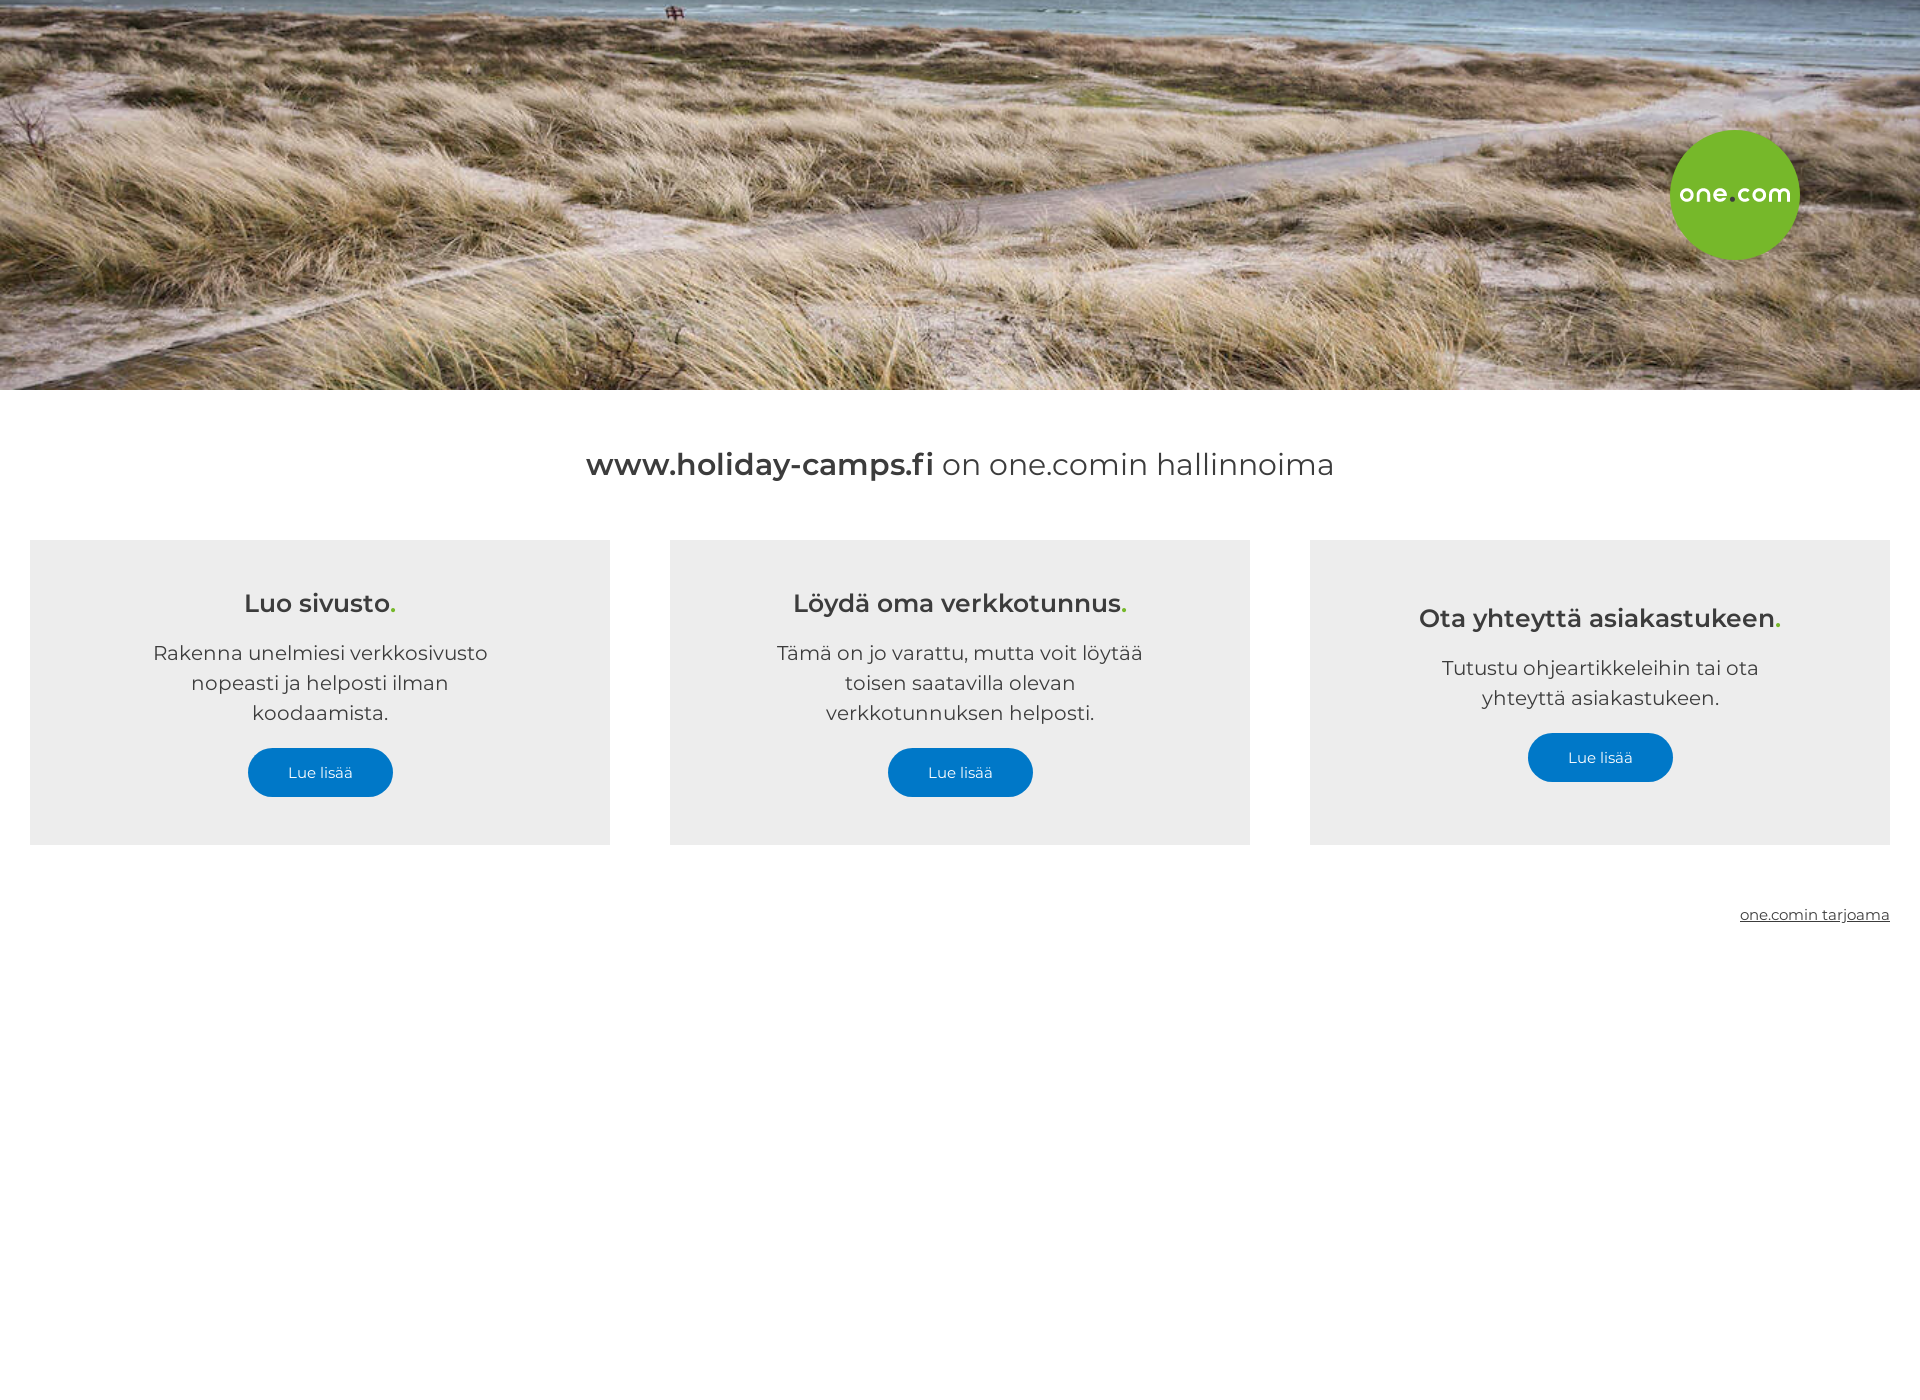 Screenshot for holiday-camps.fi